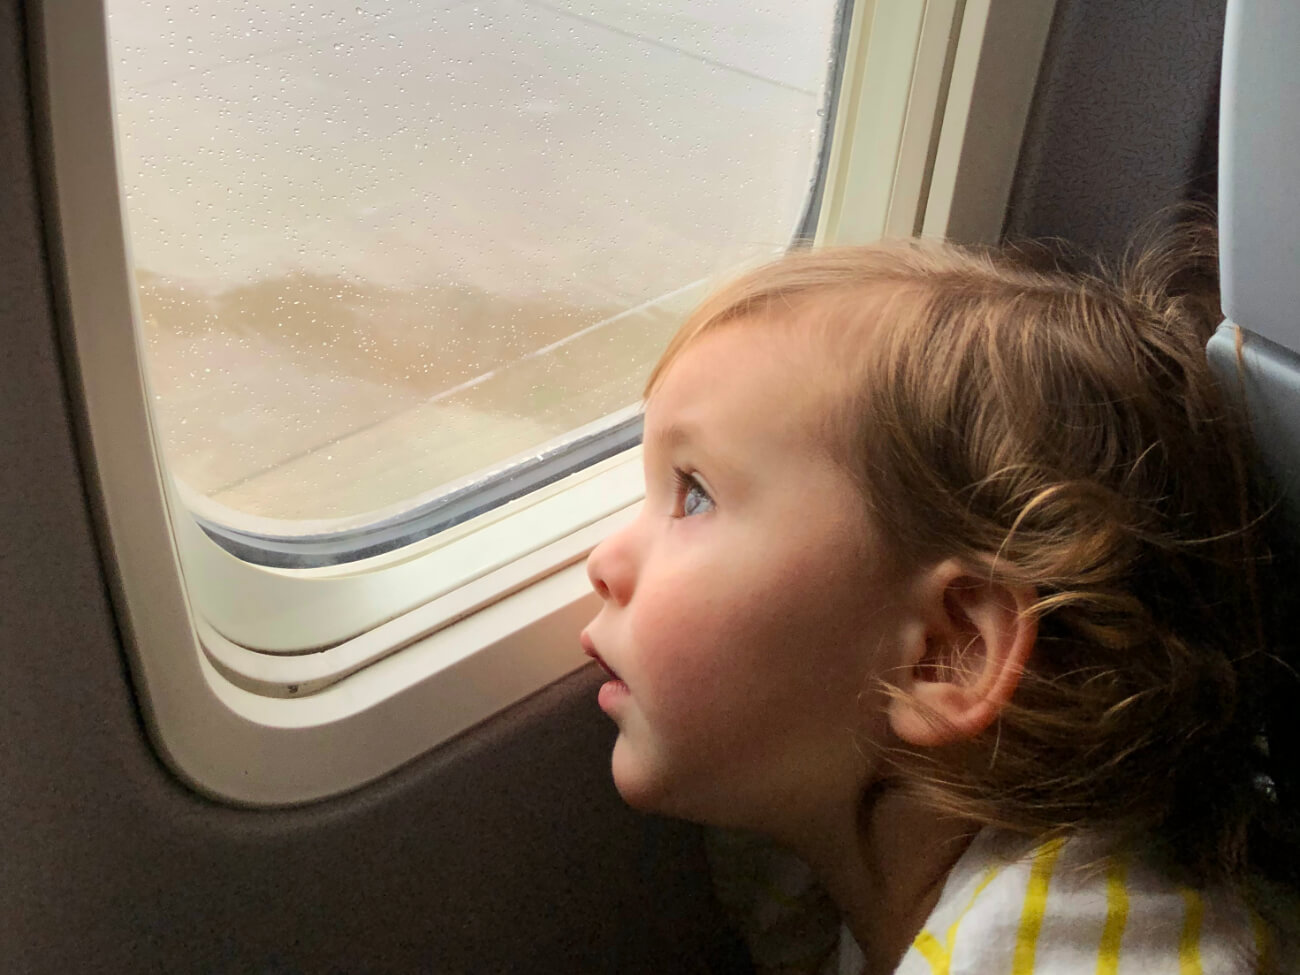 Flying with Toddlers & the Depravity of Mankind